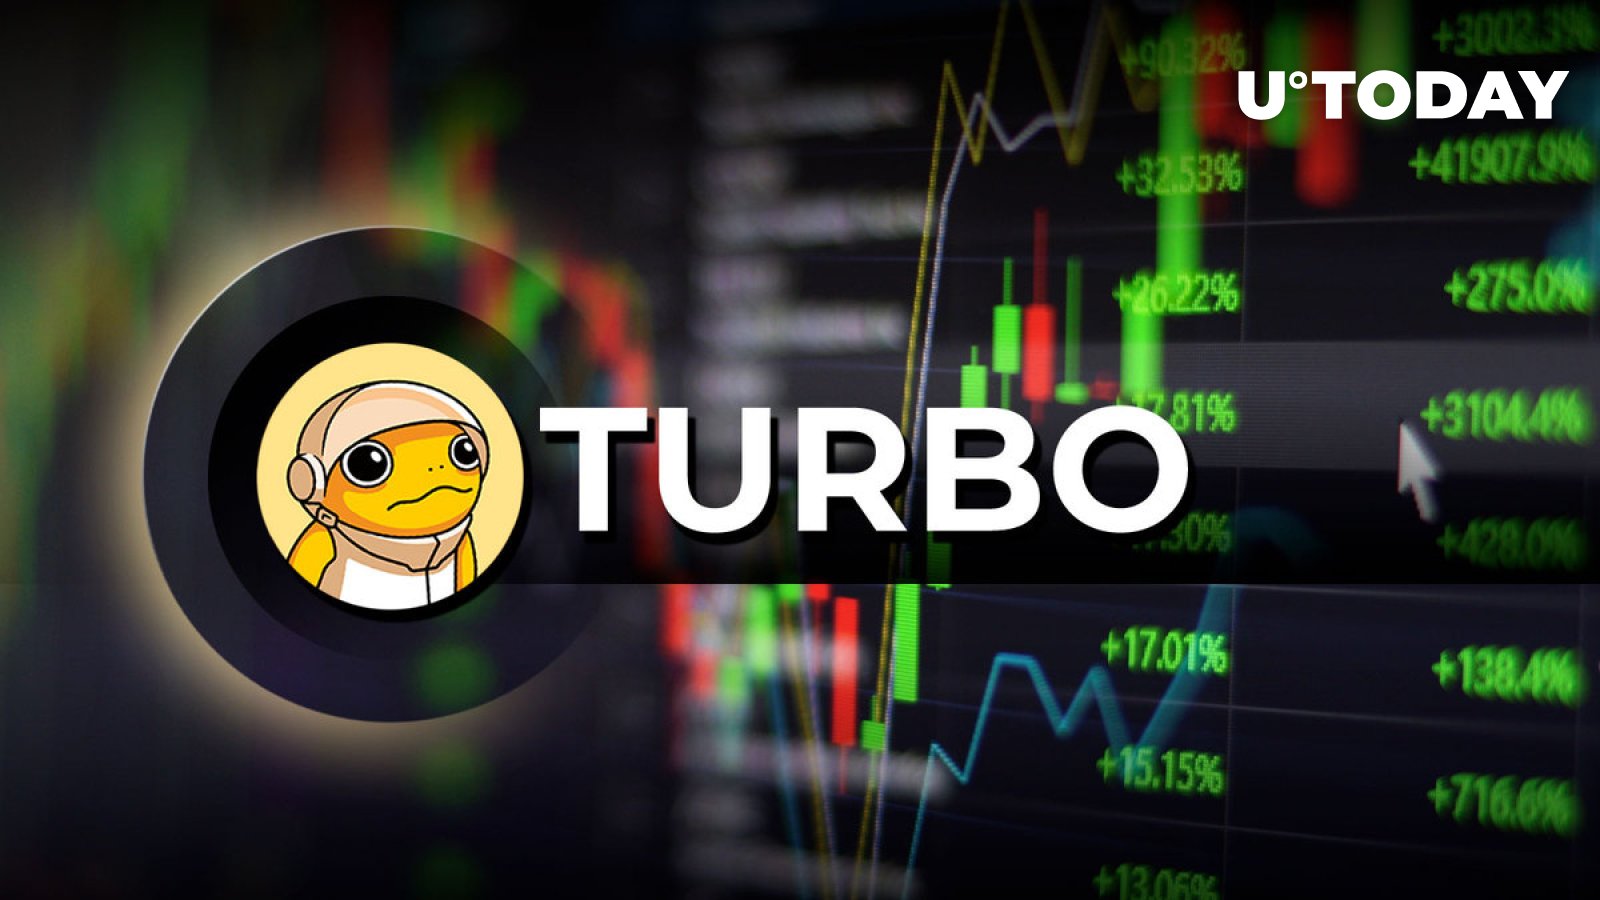 Turbo (TURBO) Meme Coin Price Adds 20% in One Hour: Reason